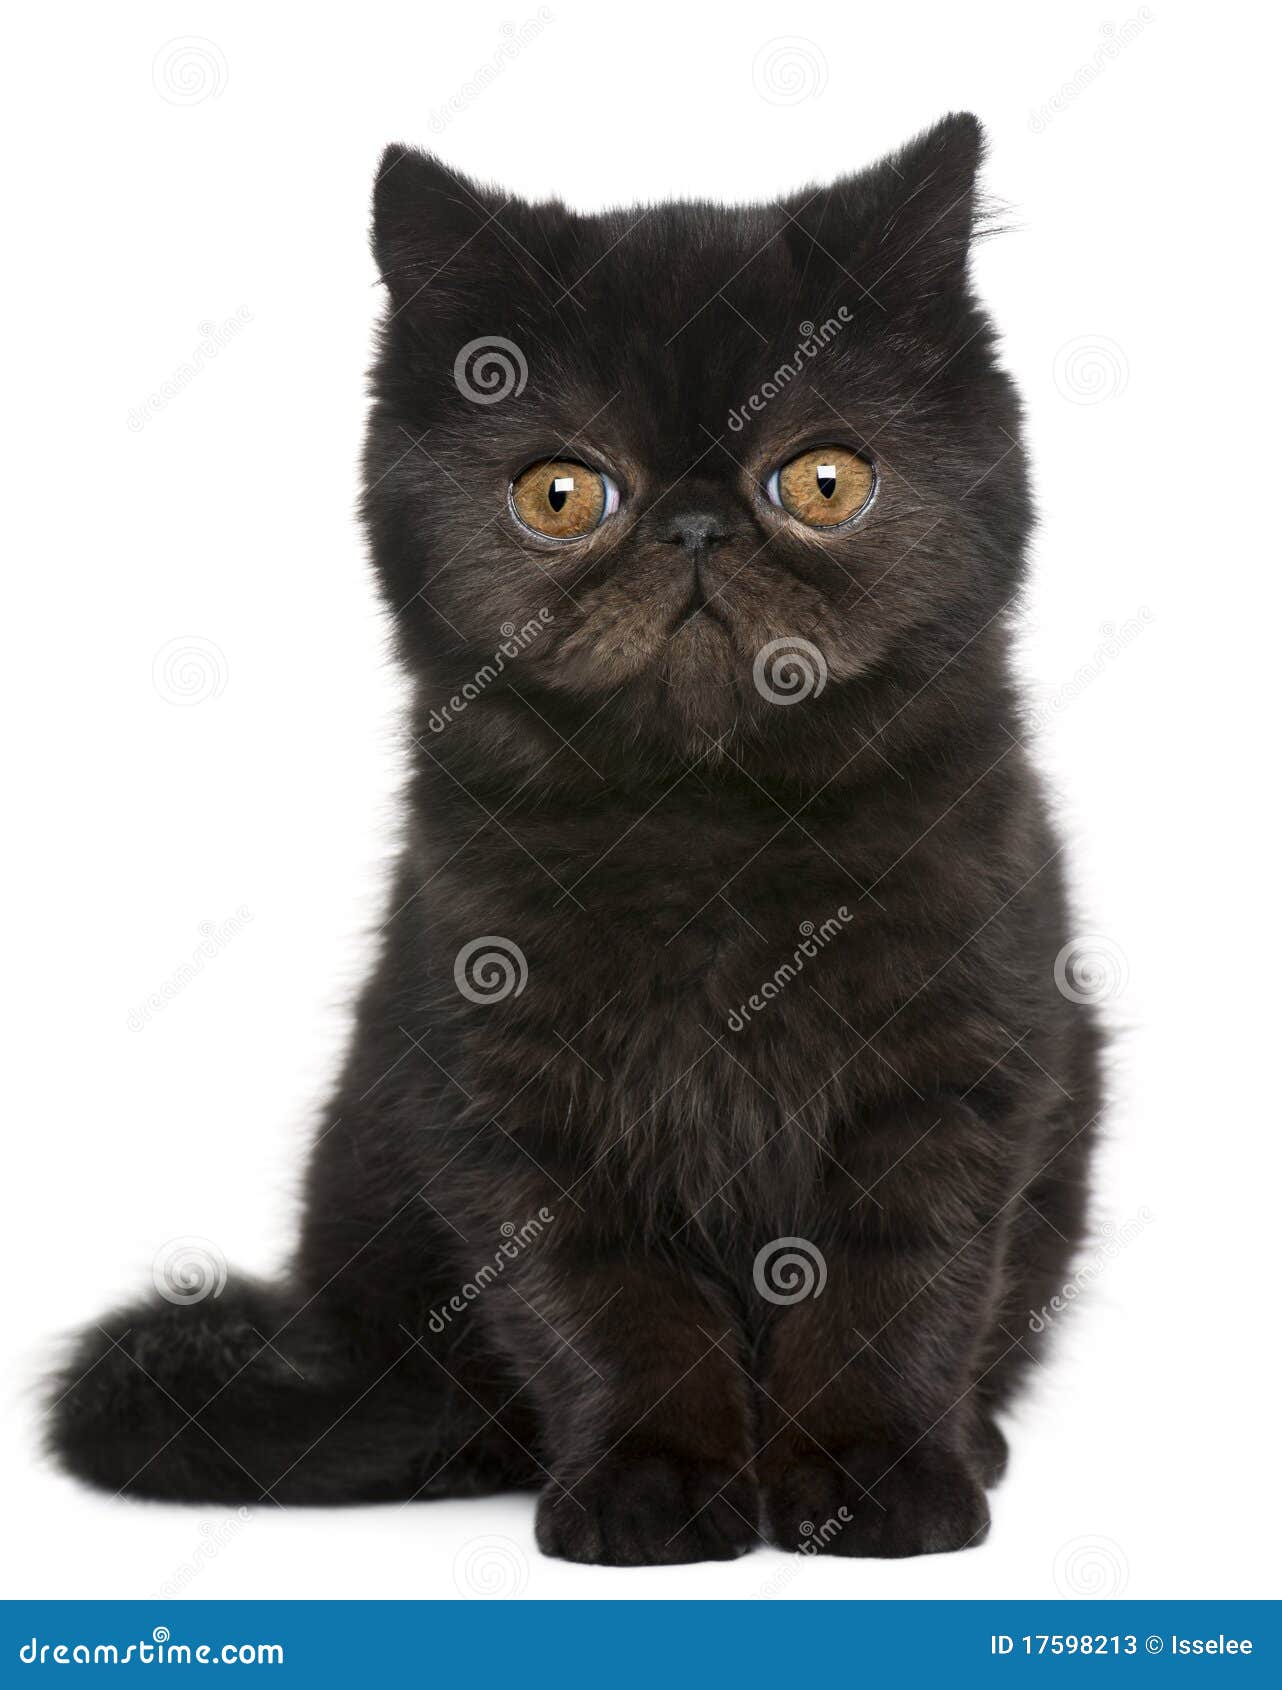 Exotic Shorthair Kitten 3 Months Old Sitting Stock Image Image Of Hair Front